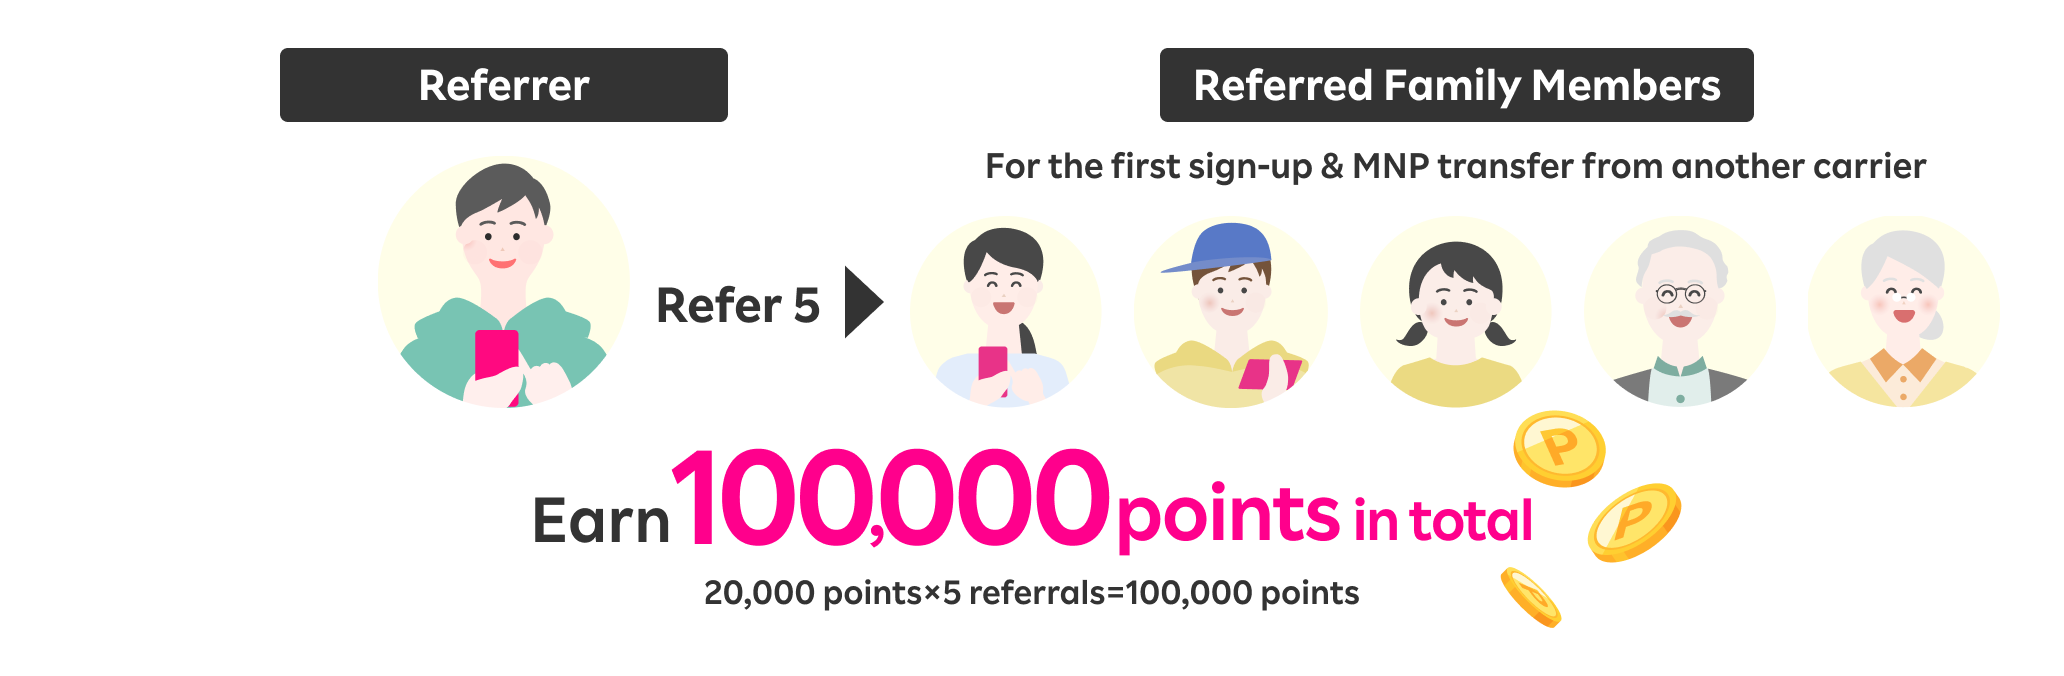 If you refer 5 family members, you can earn 100,000 points in total.